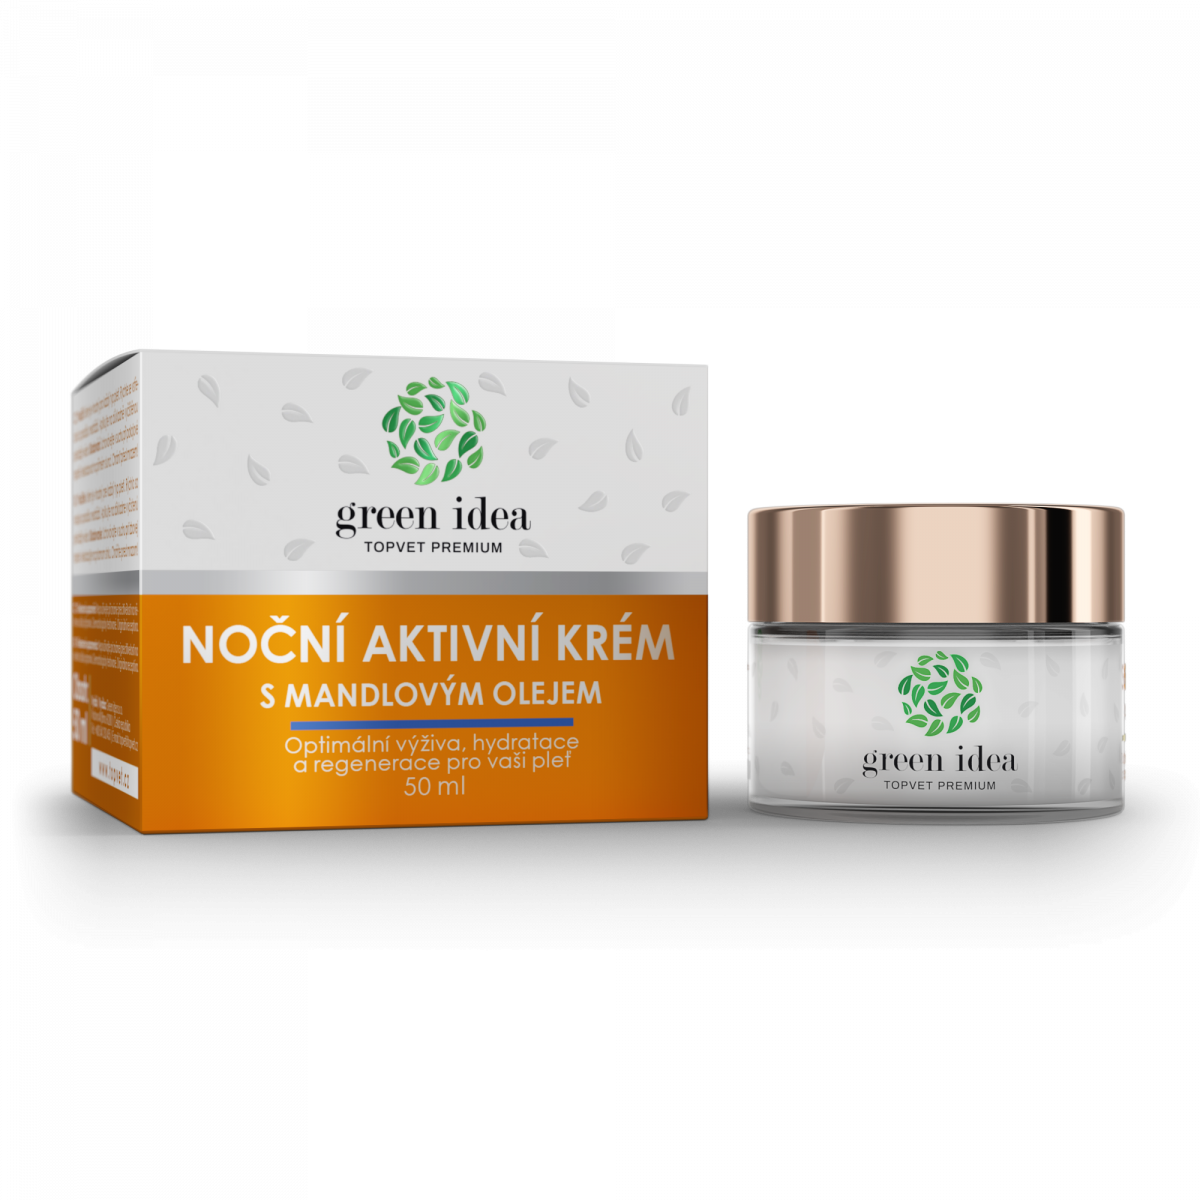 Night active cream with almond oil